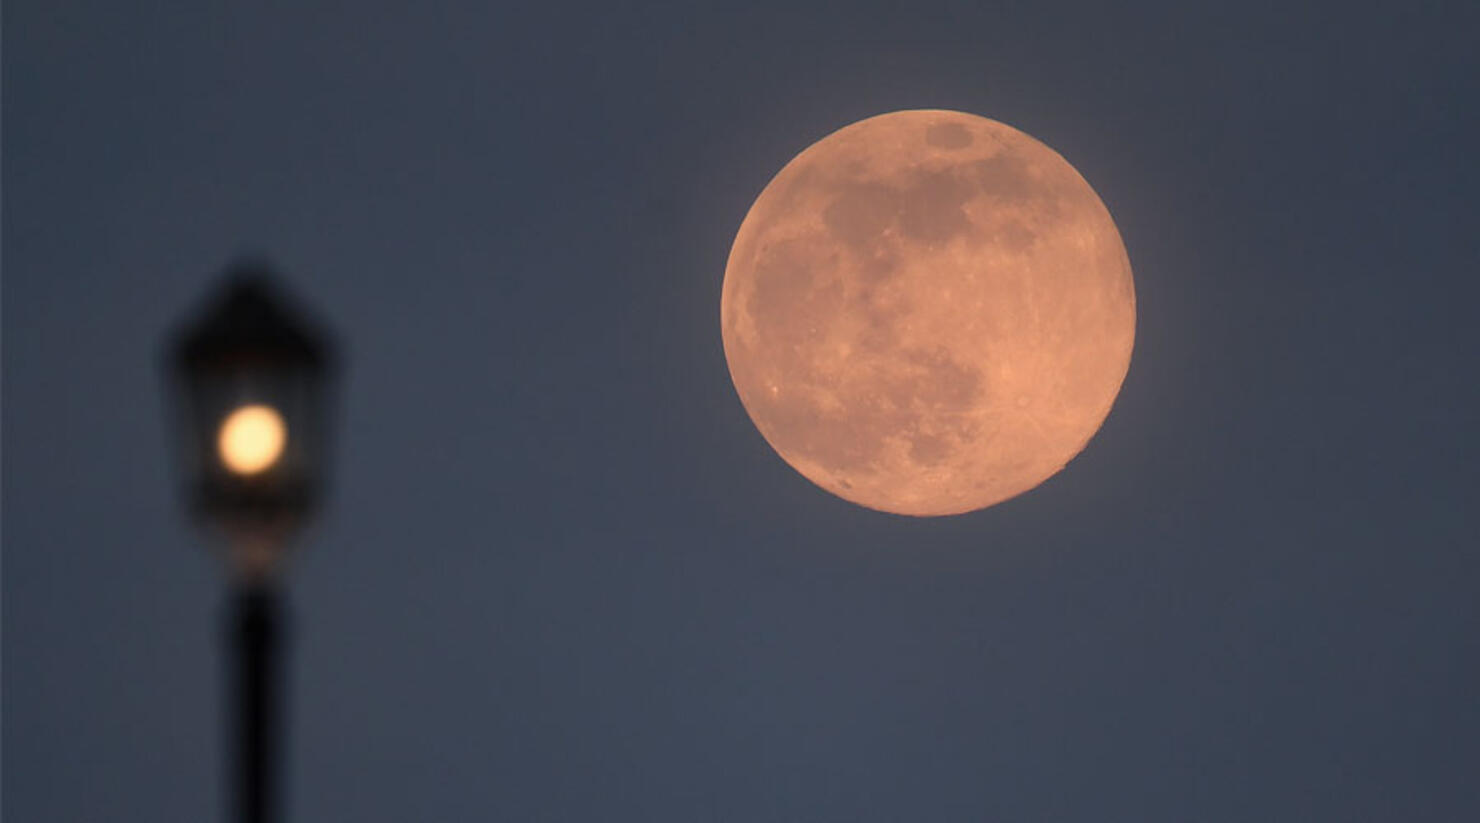 April's full pink moon will rise this week